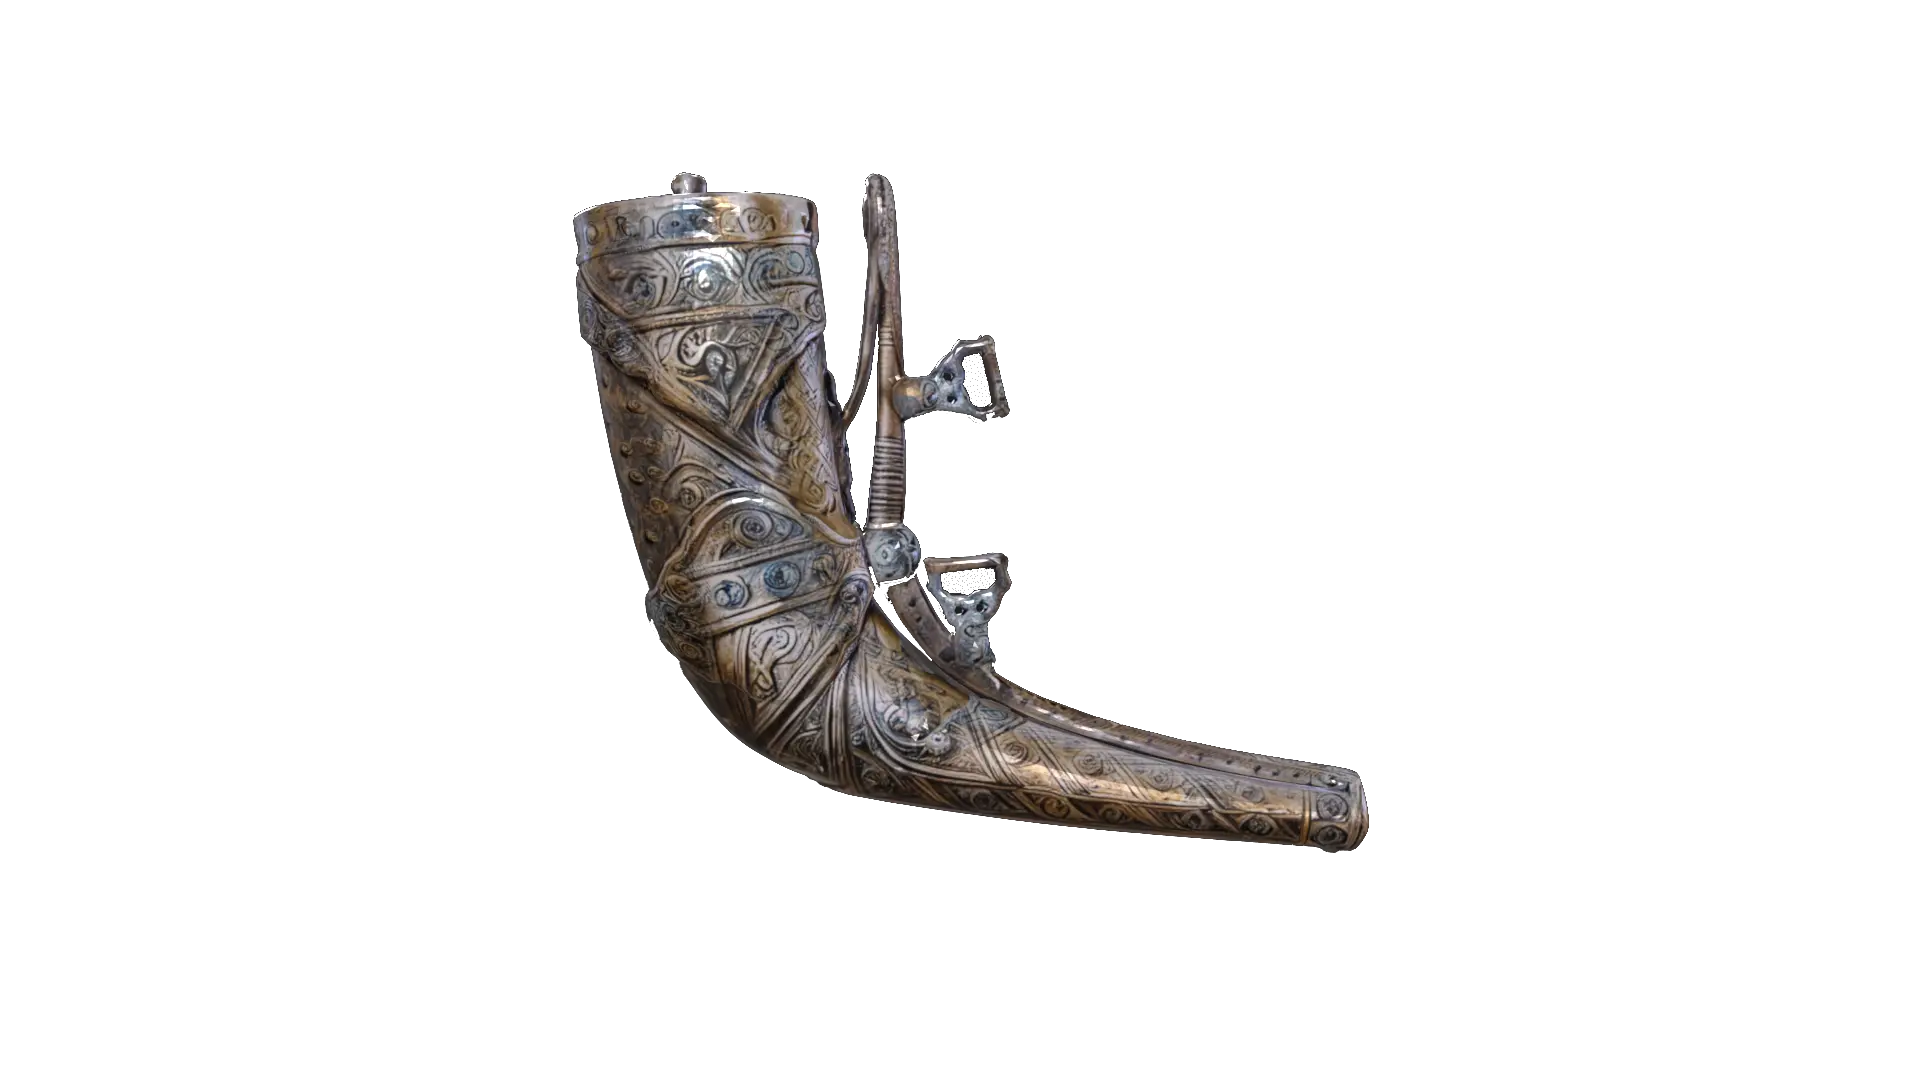 A Medieval Horns, ancient, 4k, hdr, best quality